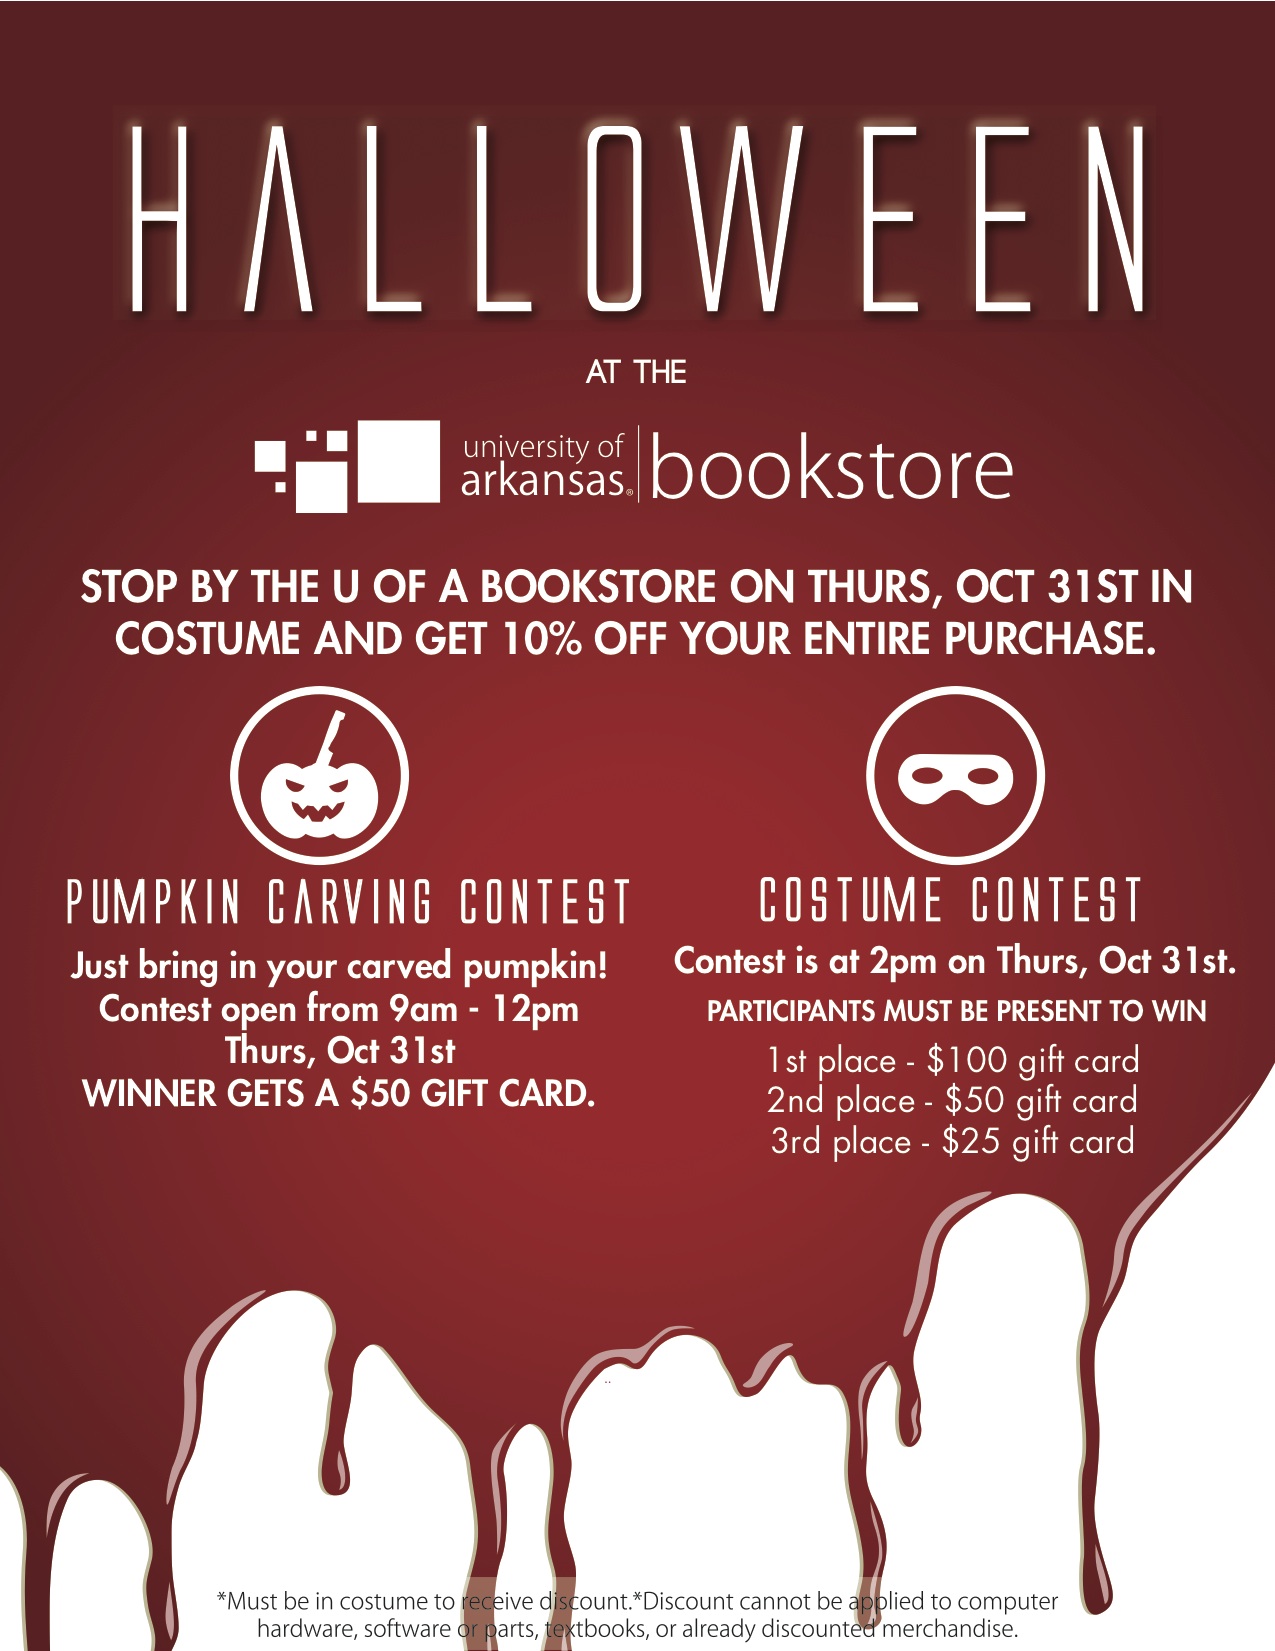 Halloween at U of A Bookstore